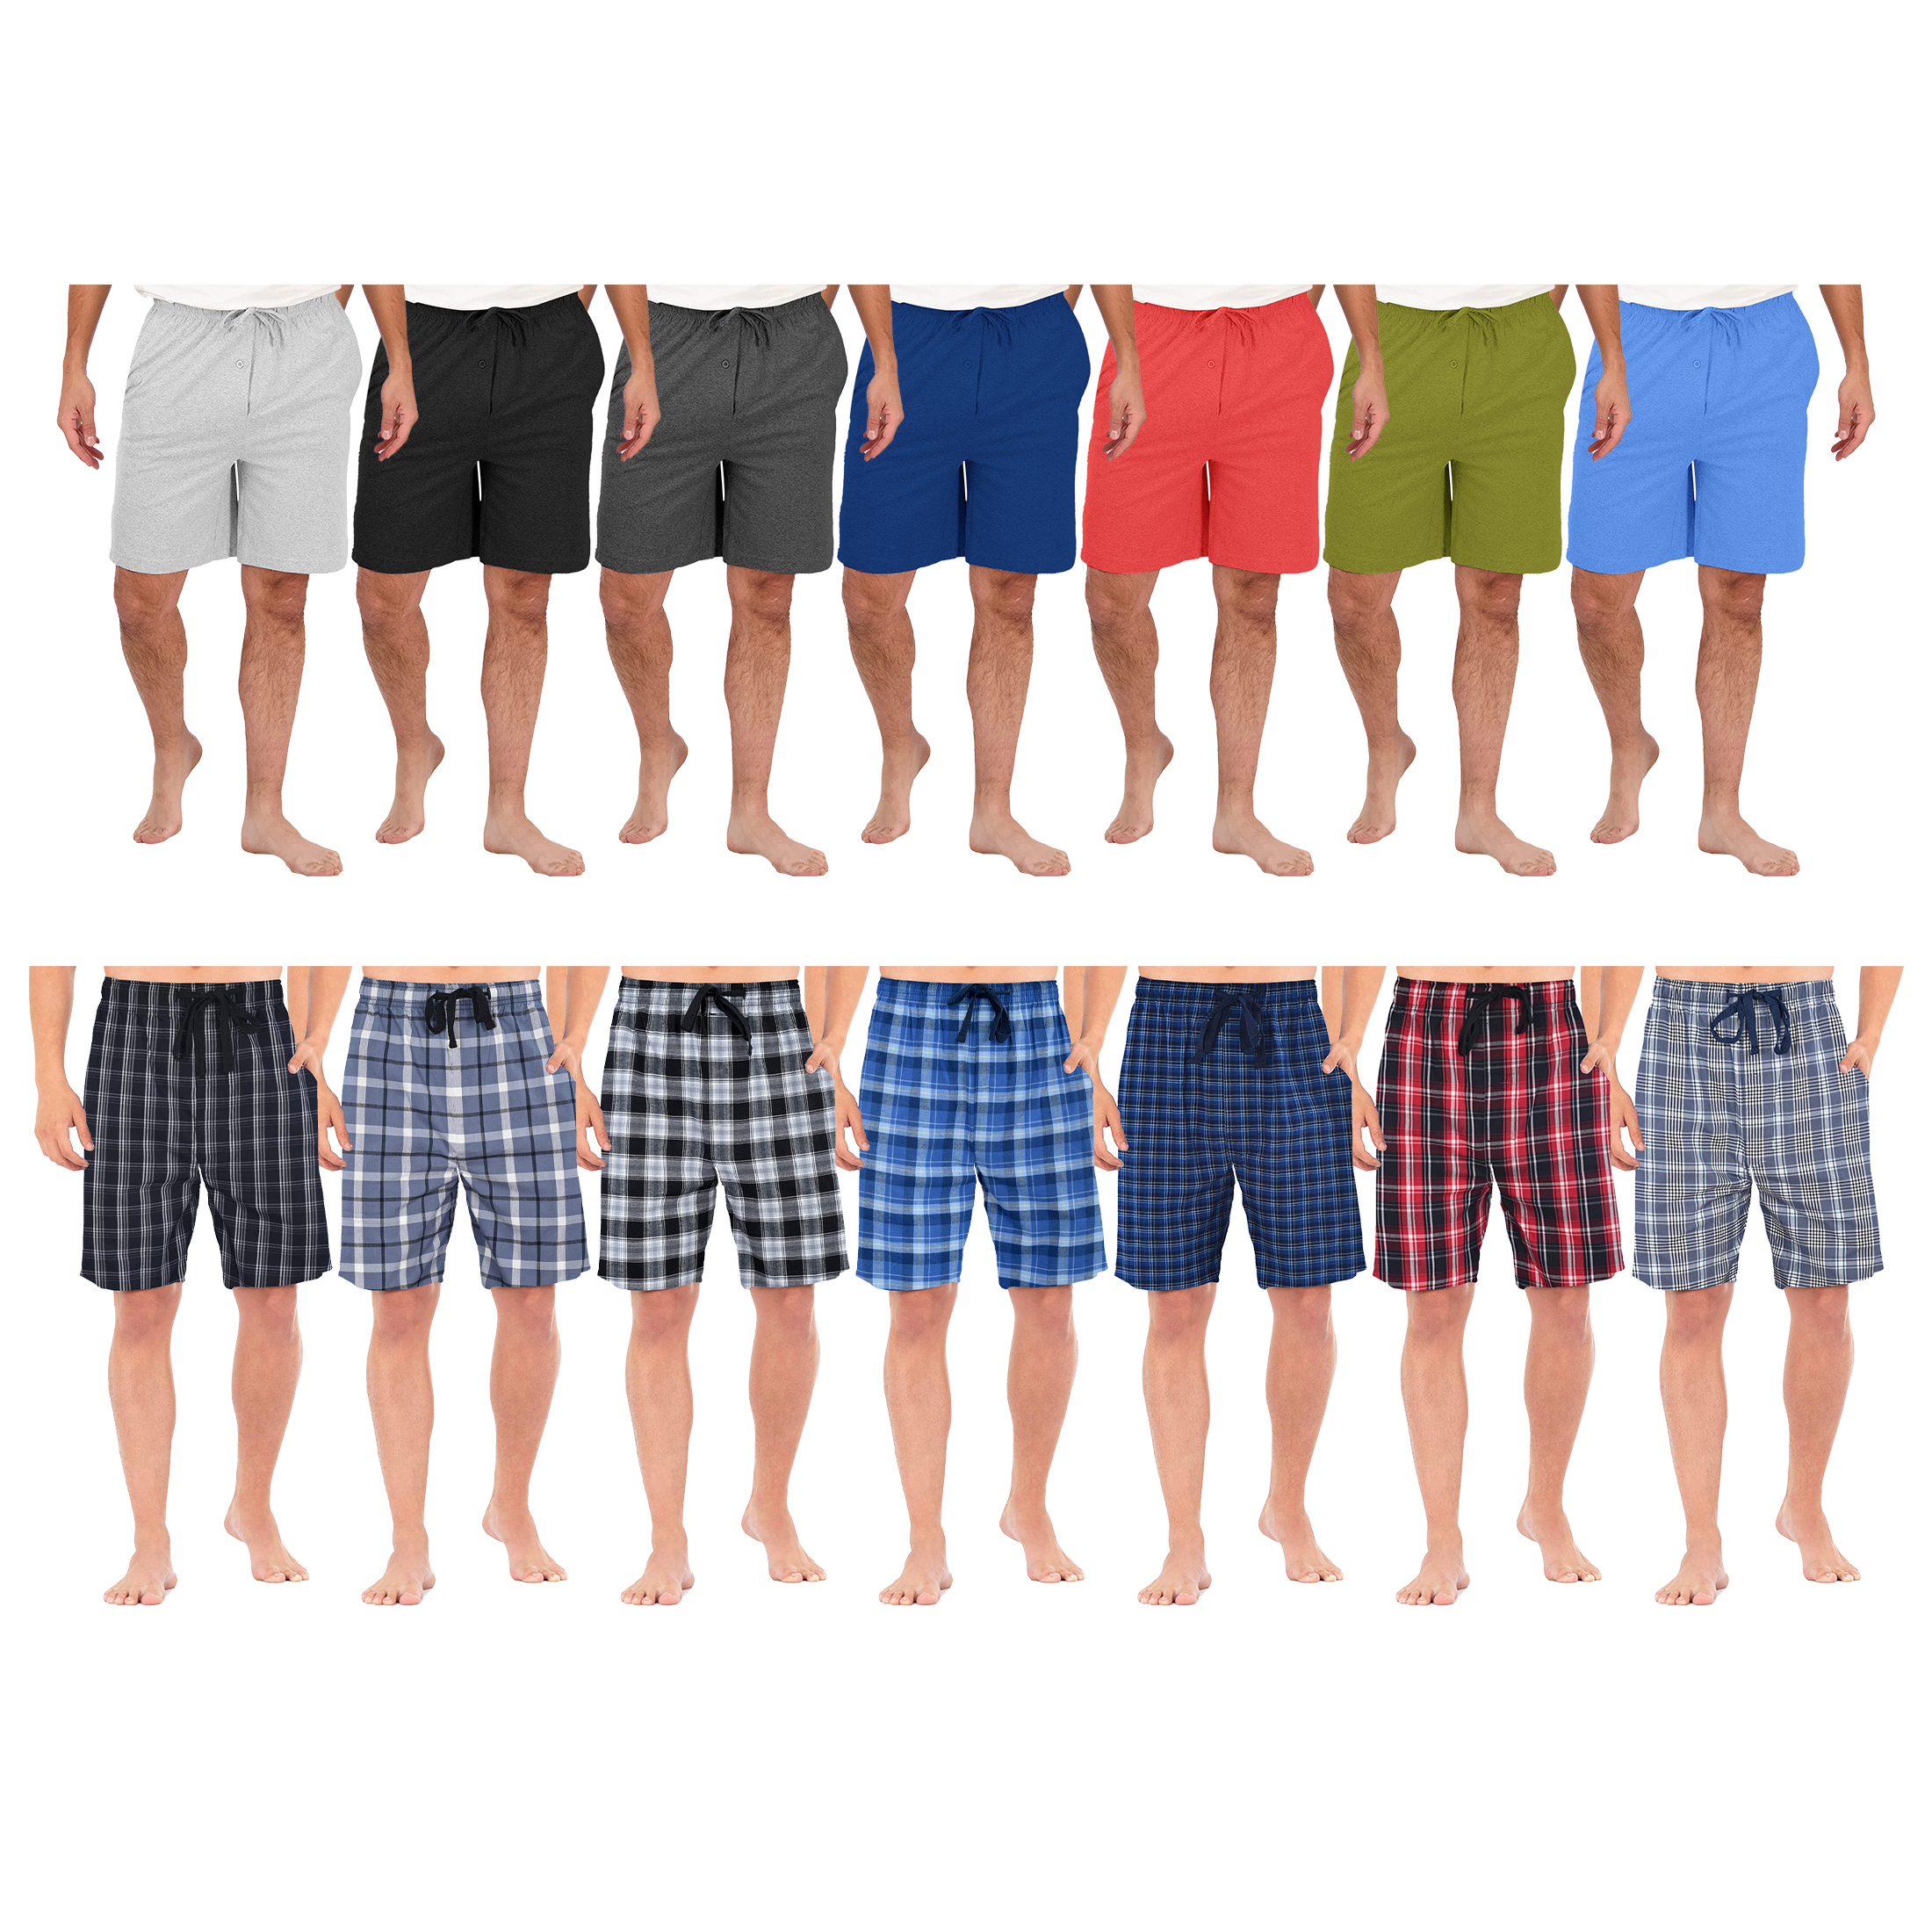 Multi-Pack: Men's Ultra-Soft Jersey Knit Sleep Lounge Pajama Shorts For Sleepwear - Solid, 3 Pack, Small